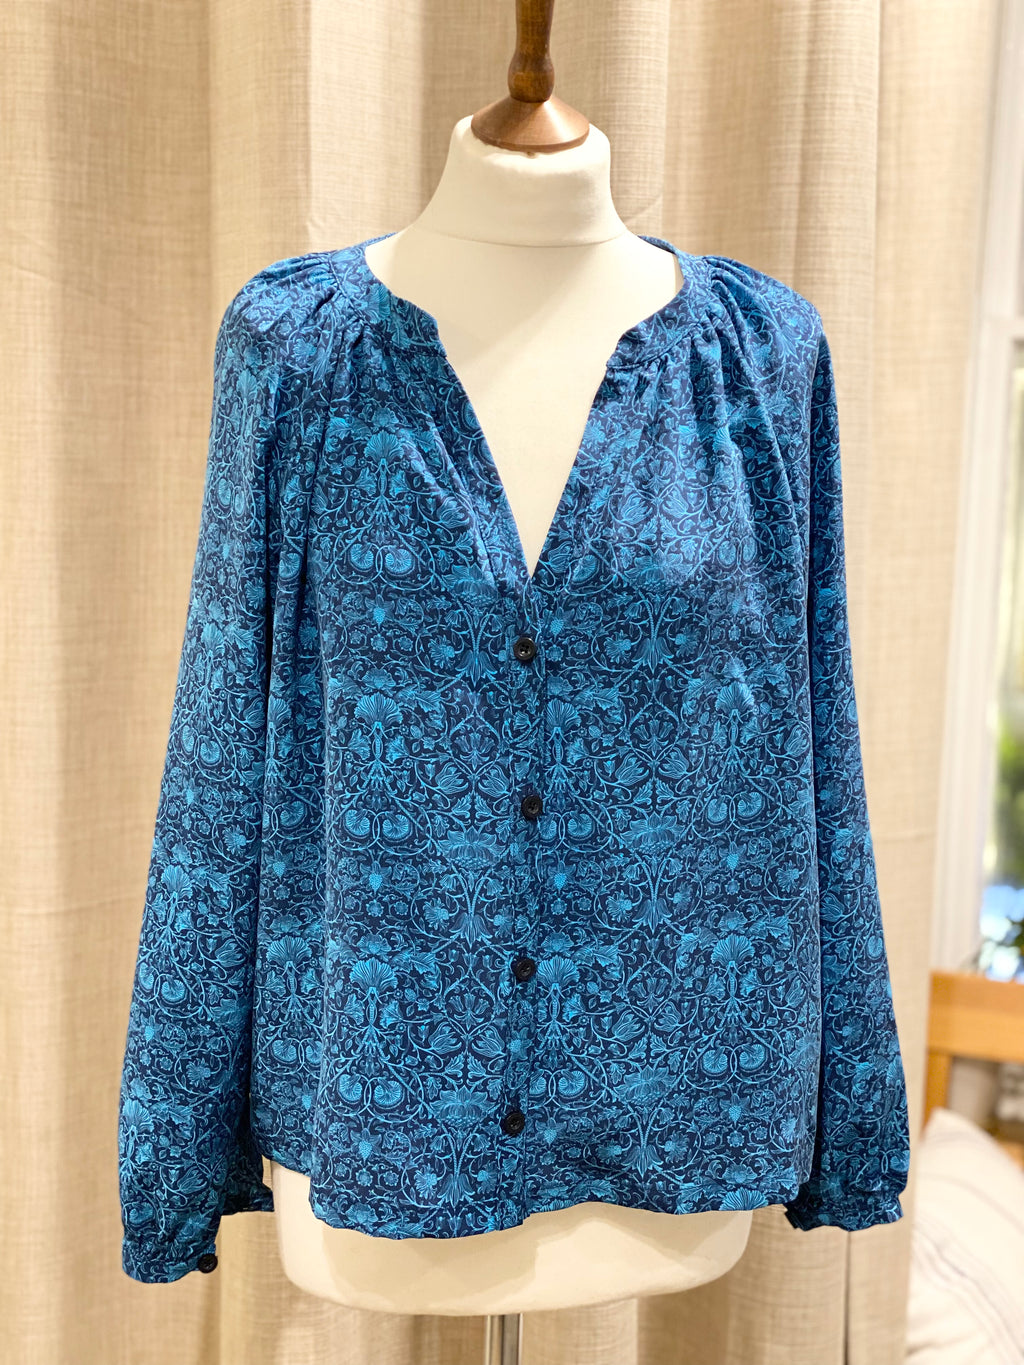 Made to measure blouse